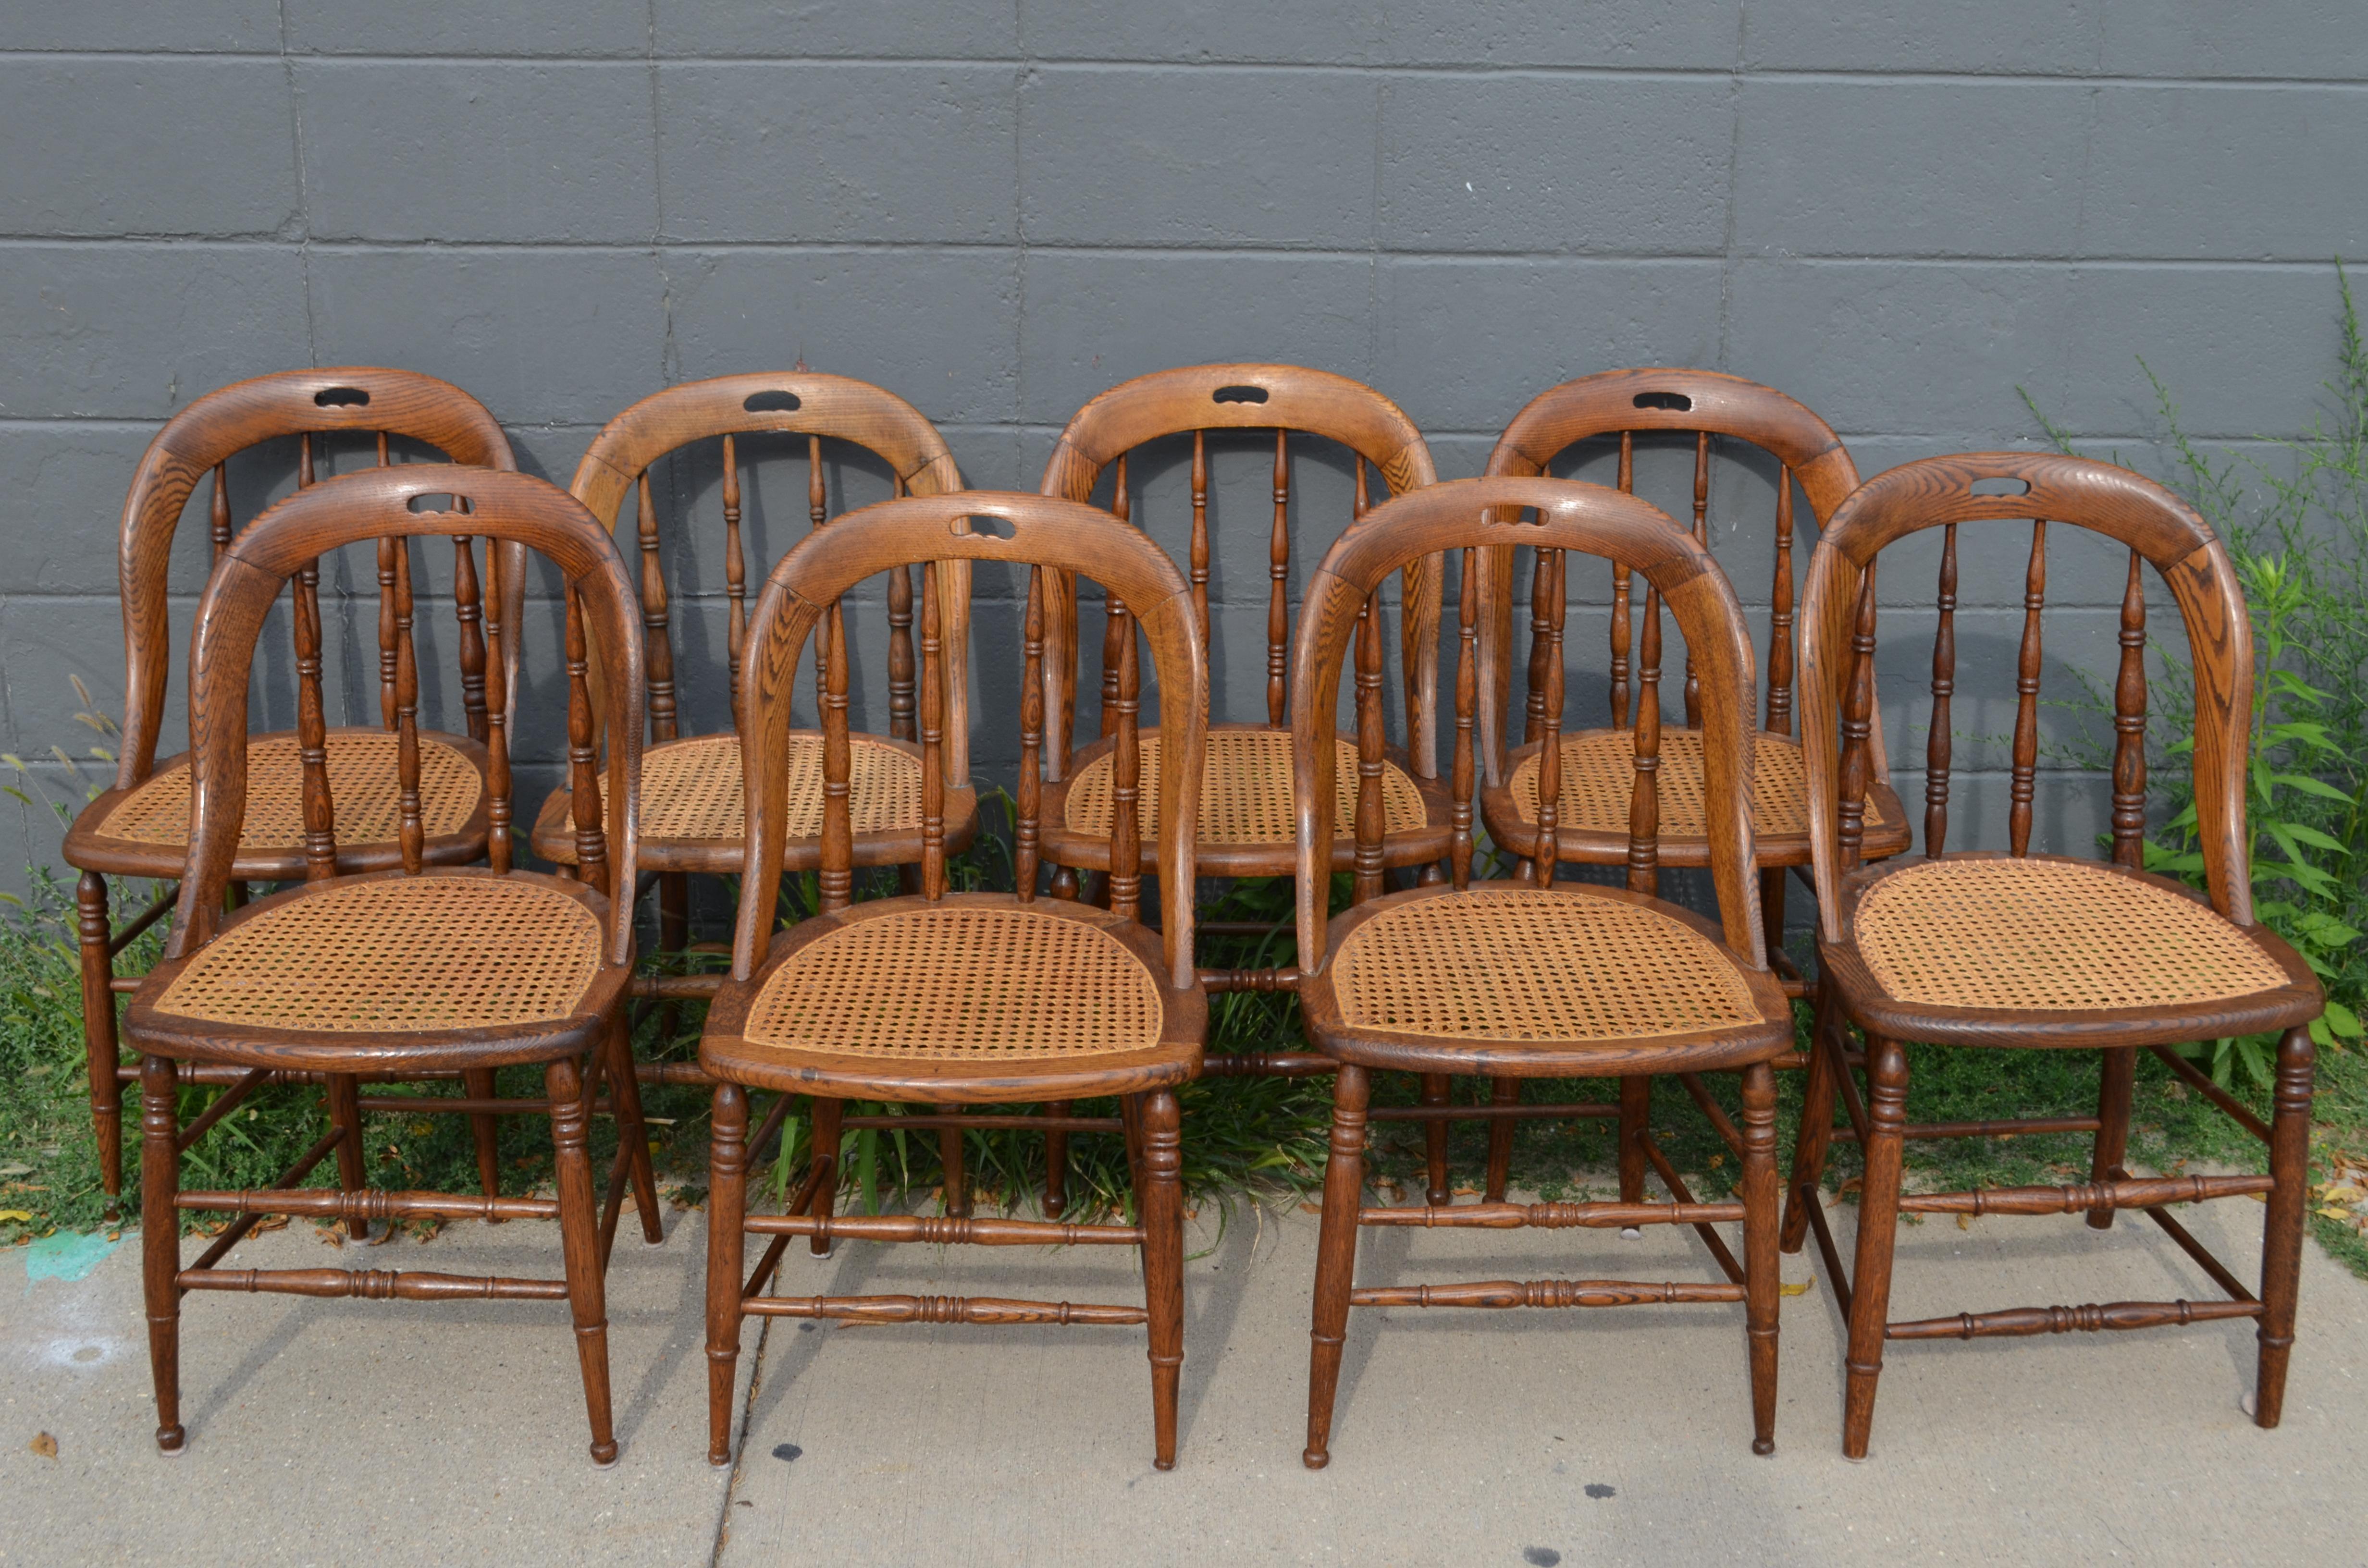 Caning Dining Room Chairs with Caned Seats, Victorian Windsor Bow Back Style, Set of 8